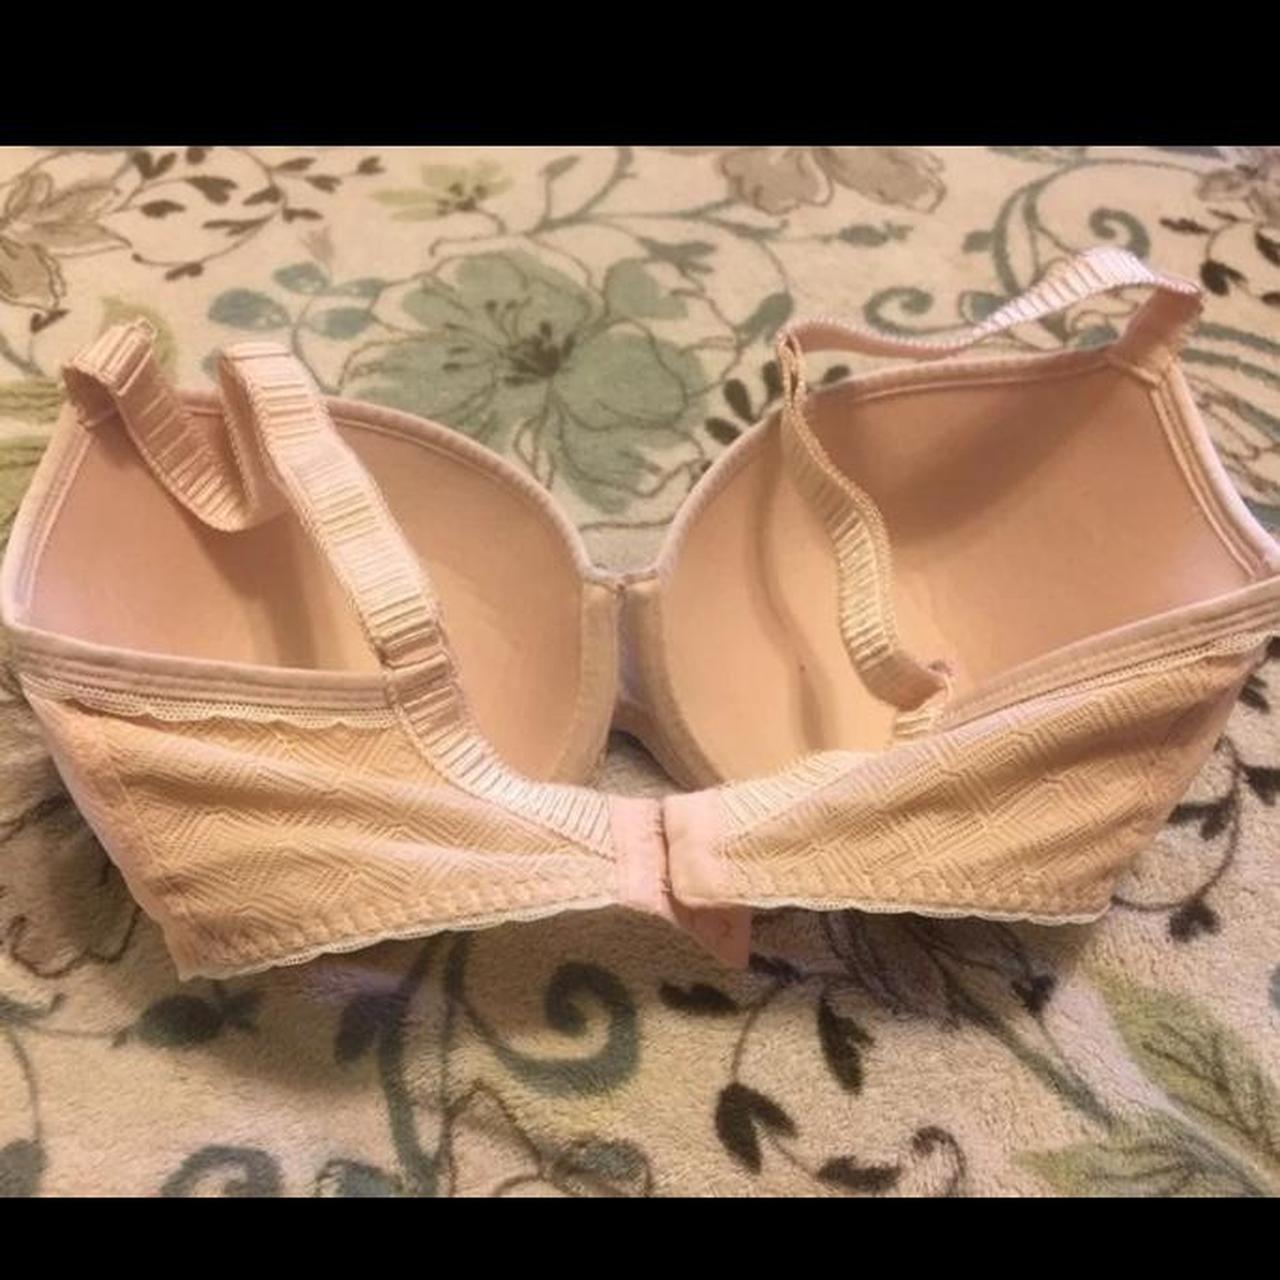 Product Image 2 - Pale pink/nude 30J Freya Bra
Underwire
Bow